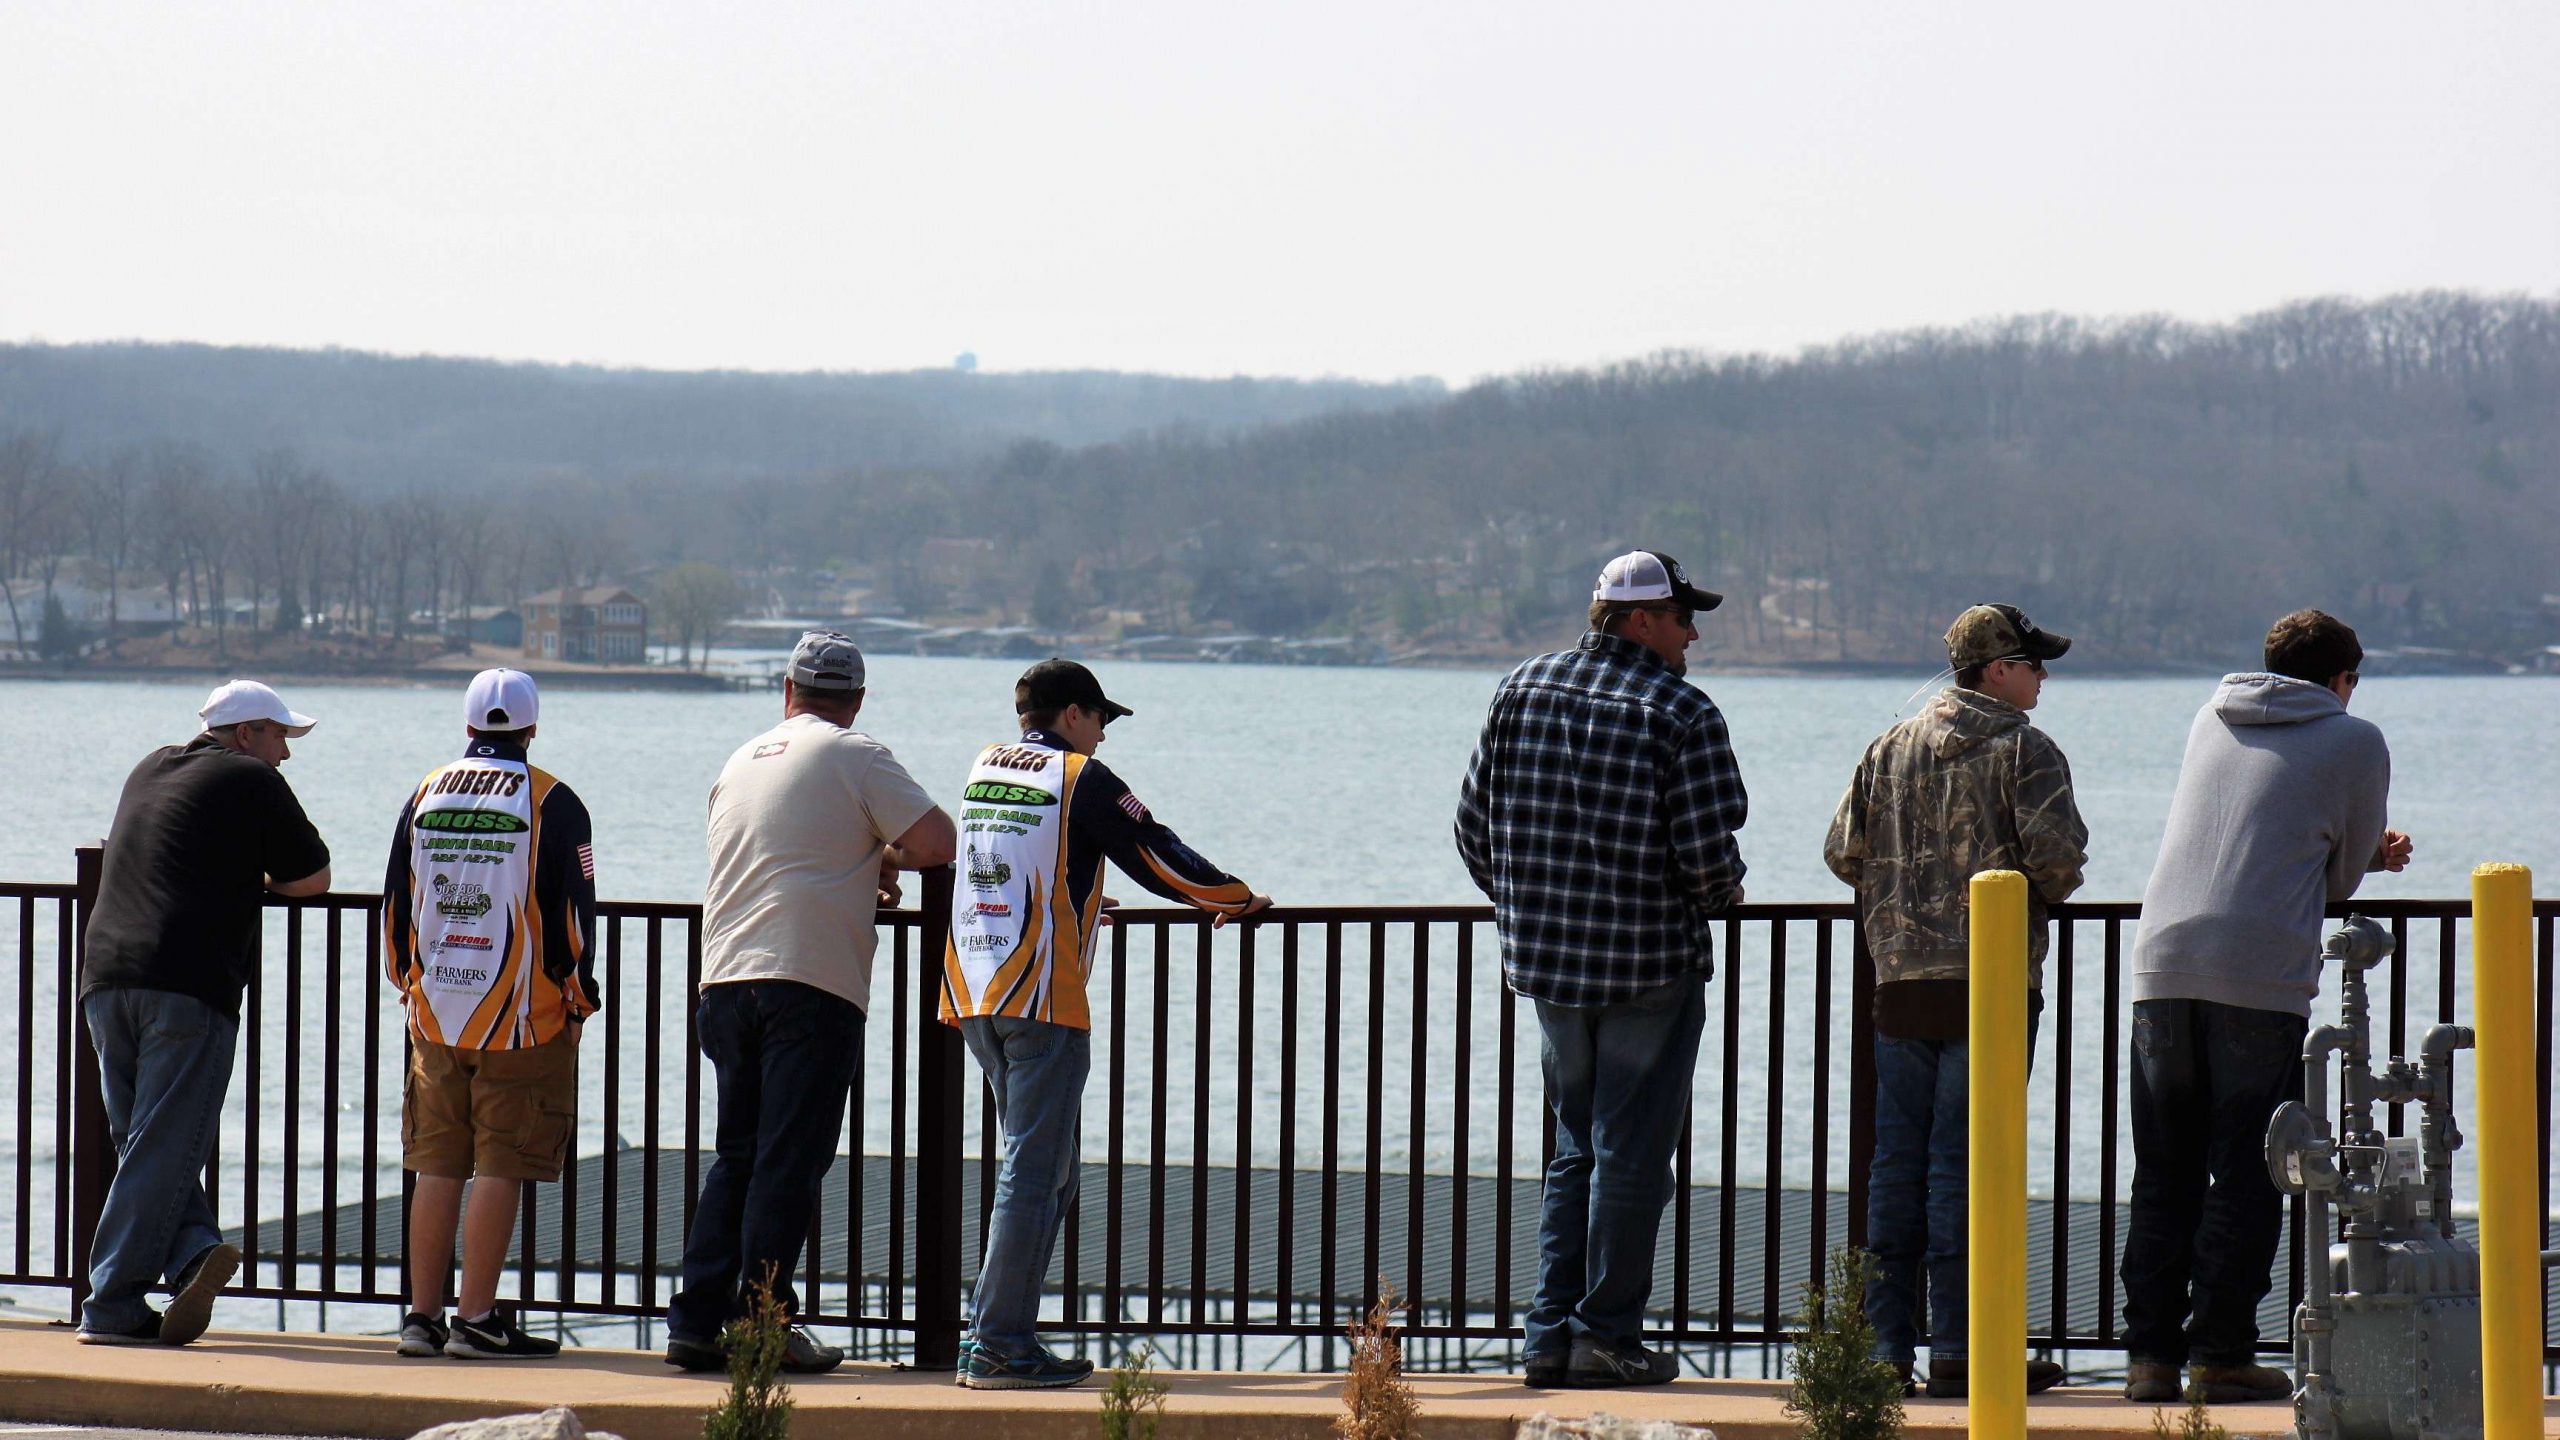 Some anglers, coaches, and parents stand high above the water to take in the panoramic view. Registration and briefing was held at Camden on the Lake Resort.